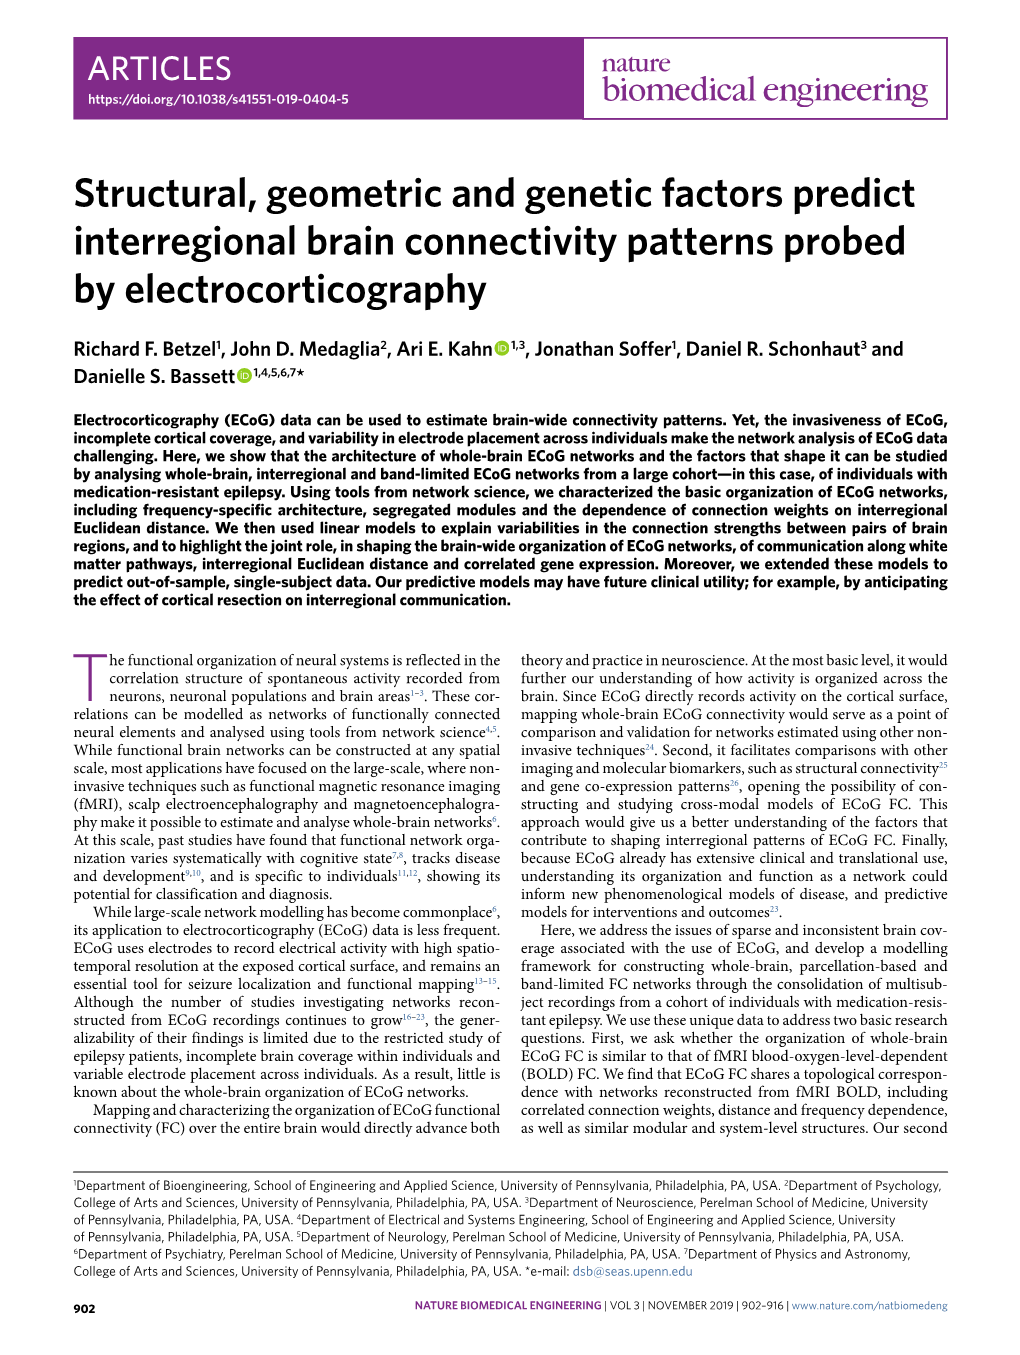 Structural, Geometric and Genetic Factors Predict Interregional Brain Connectivity Patterns Probed by Electrocorticography